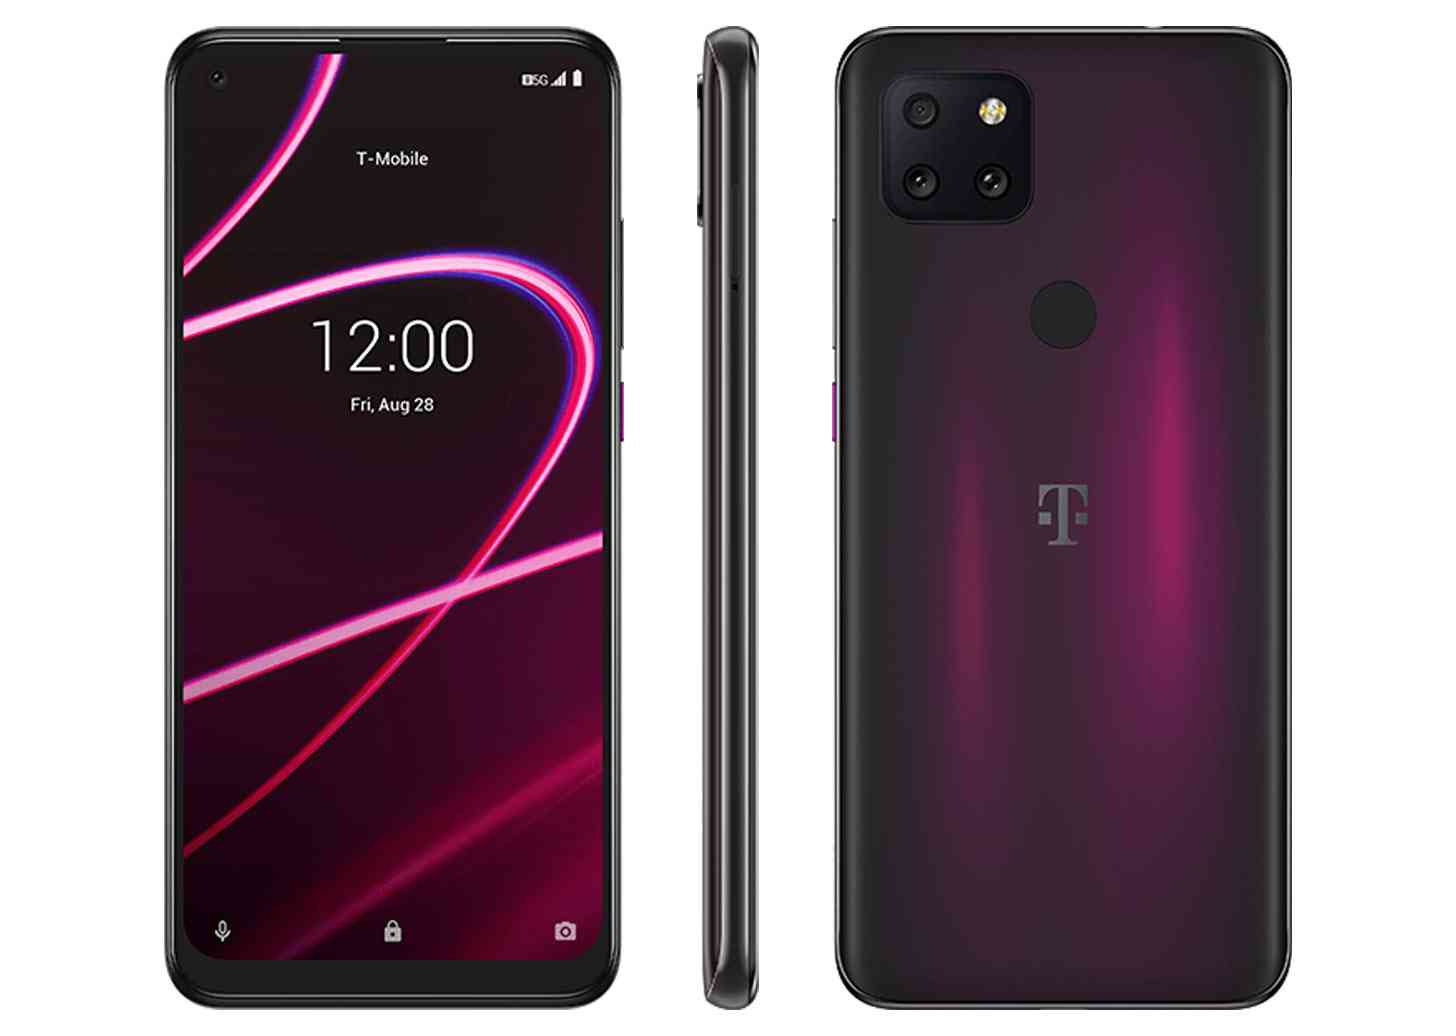 New T-Mobile REVVL includes 5G, triple rear cameras, and 4500mAh